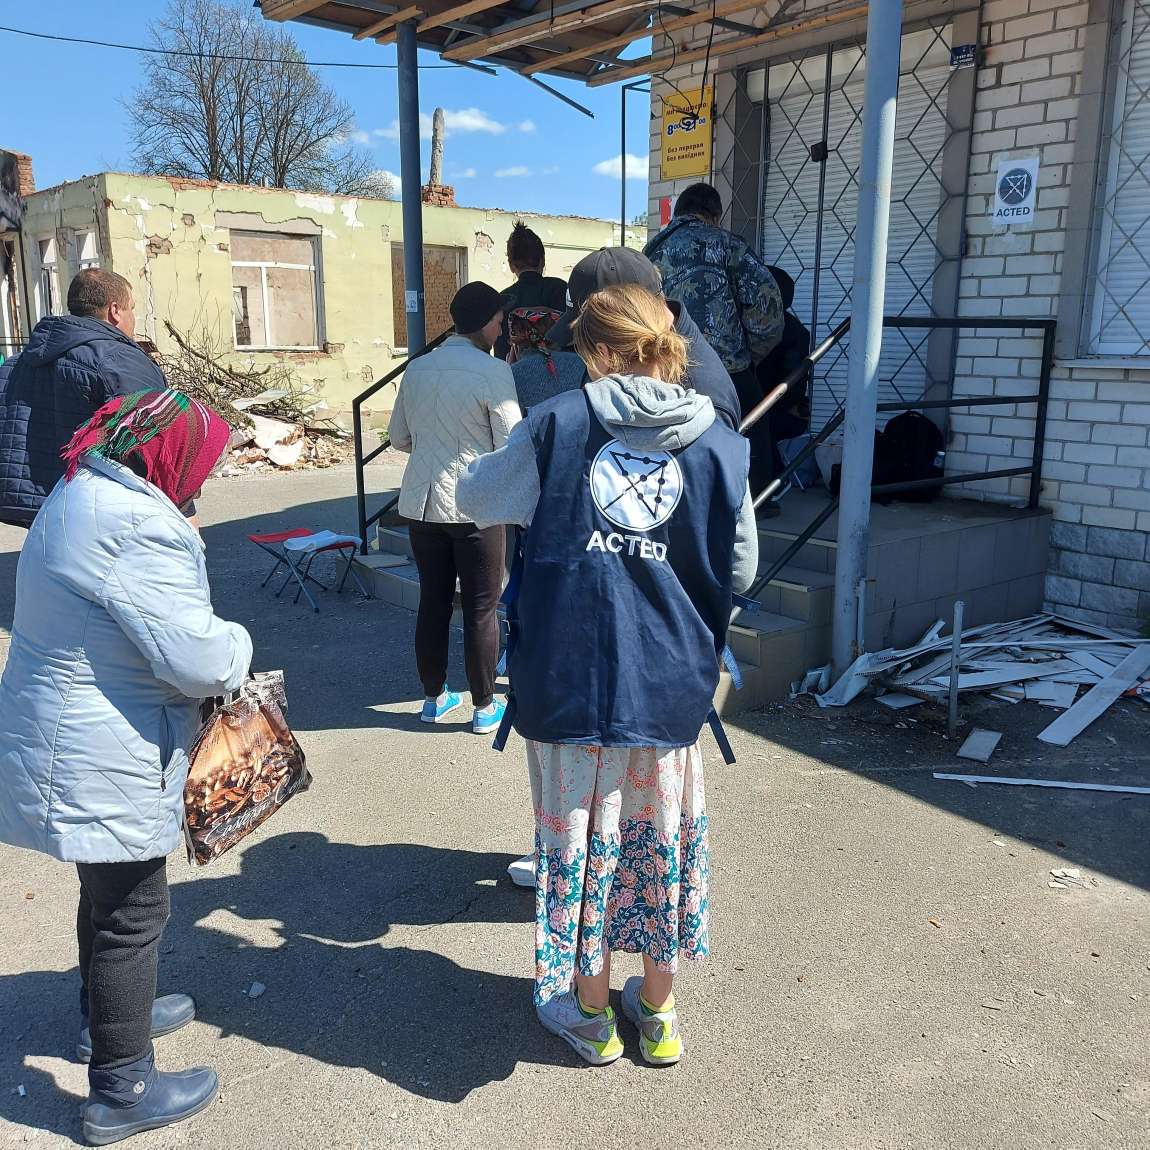 The importance of cash assistance to respond quickly to Ukrainians' needs -  ACTED